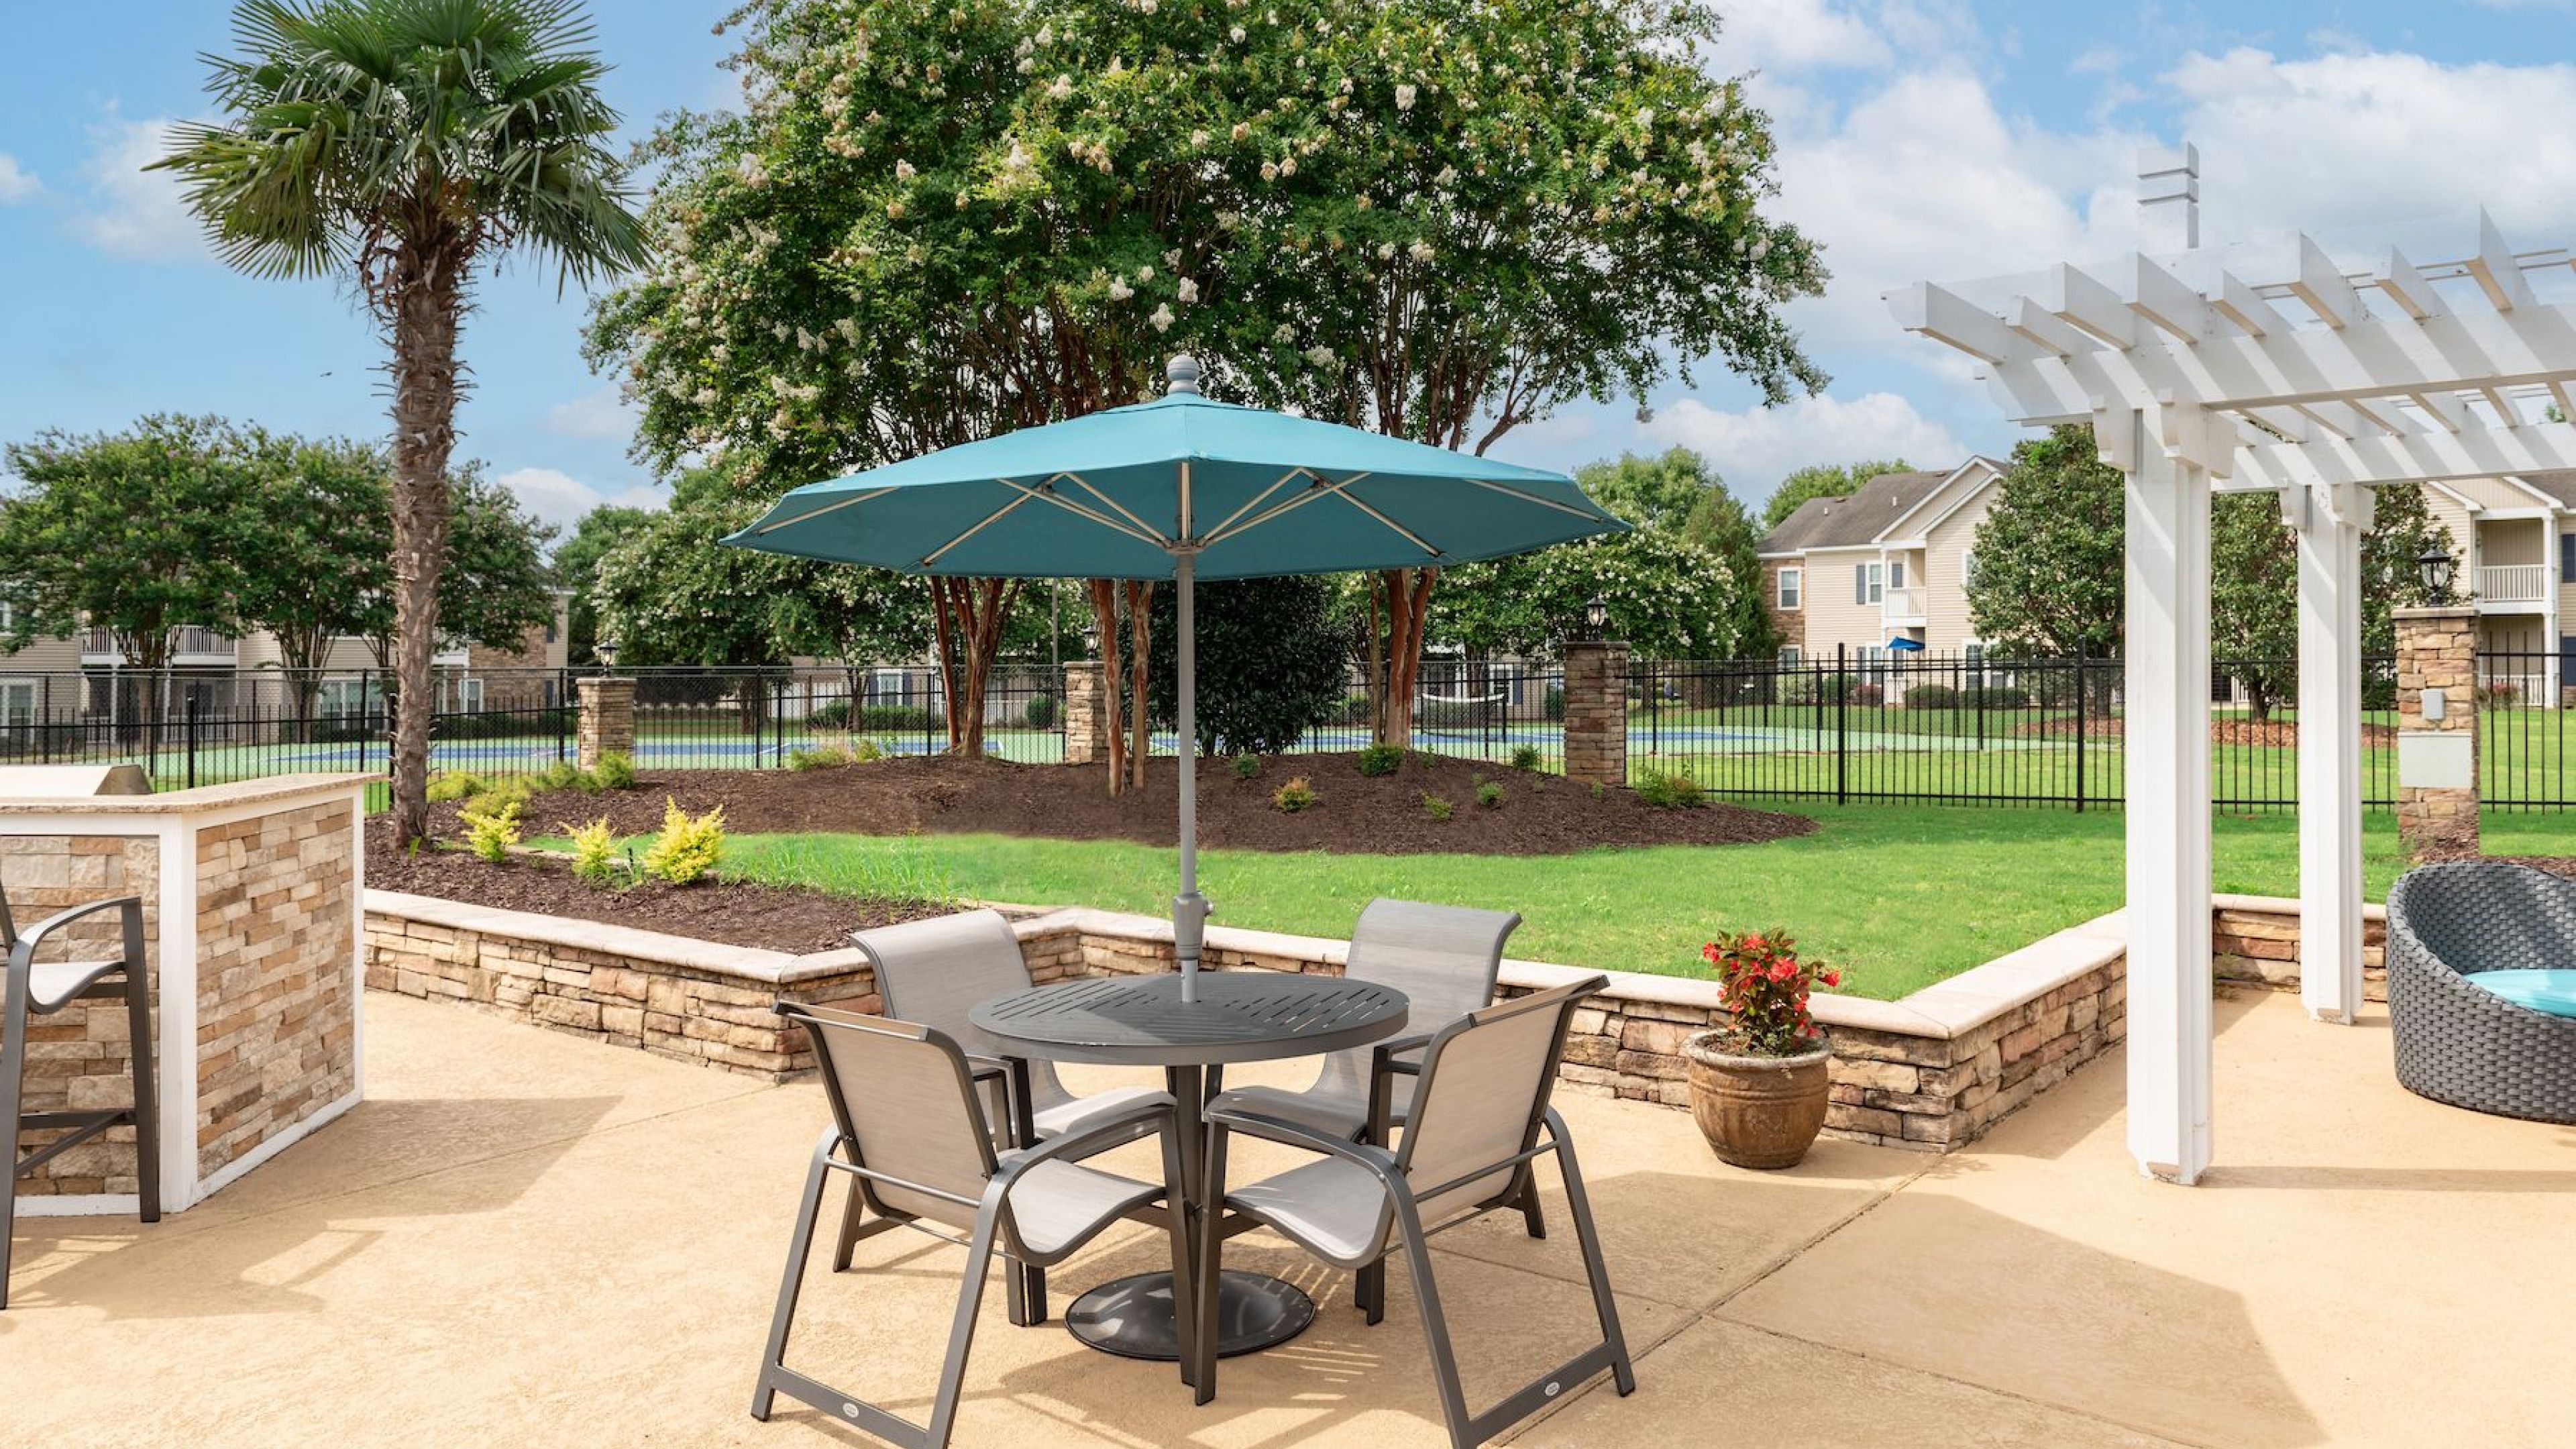 Outdoor patio with furniture and umbrella in the peaceful Hawthorne Meadowview complex in Warner Robins, GA